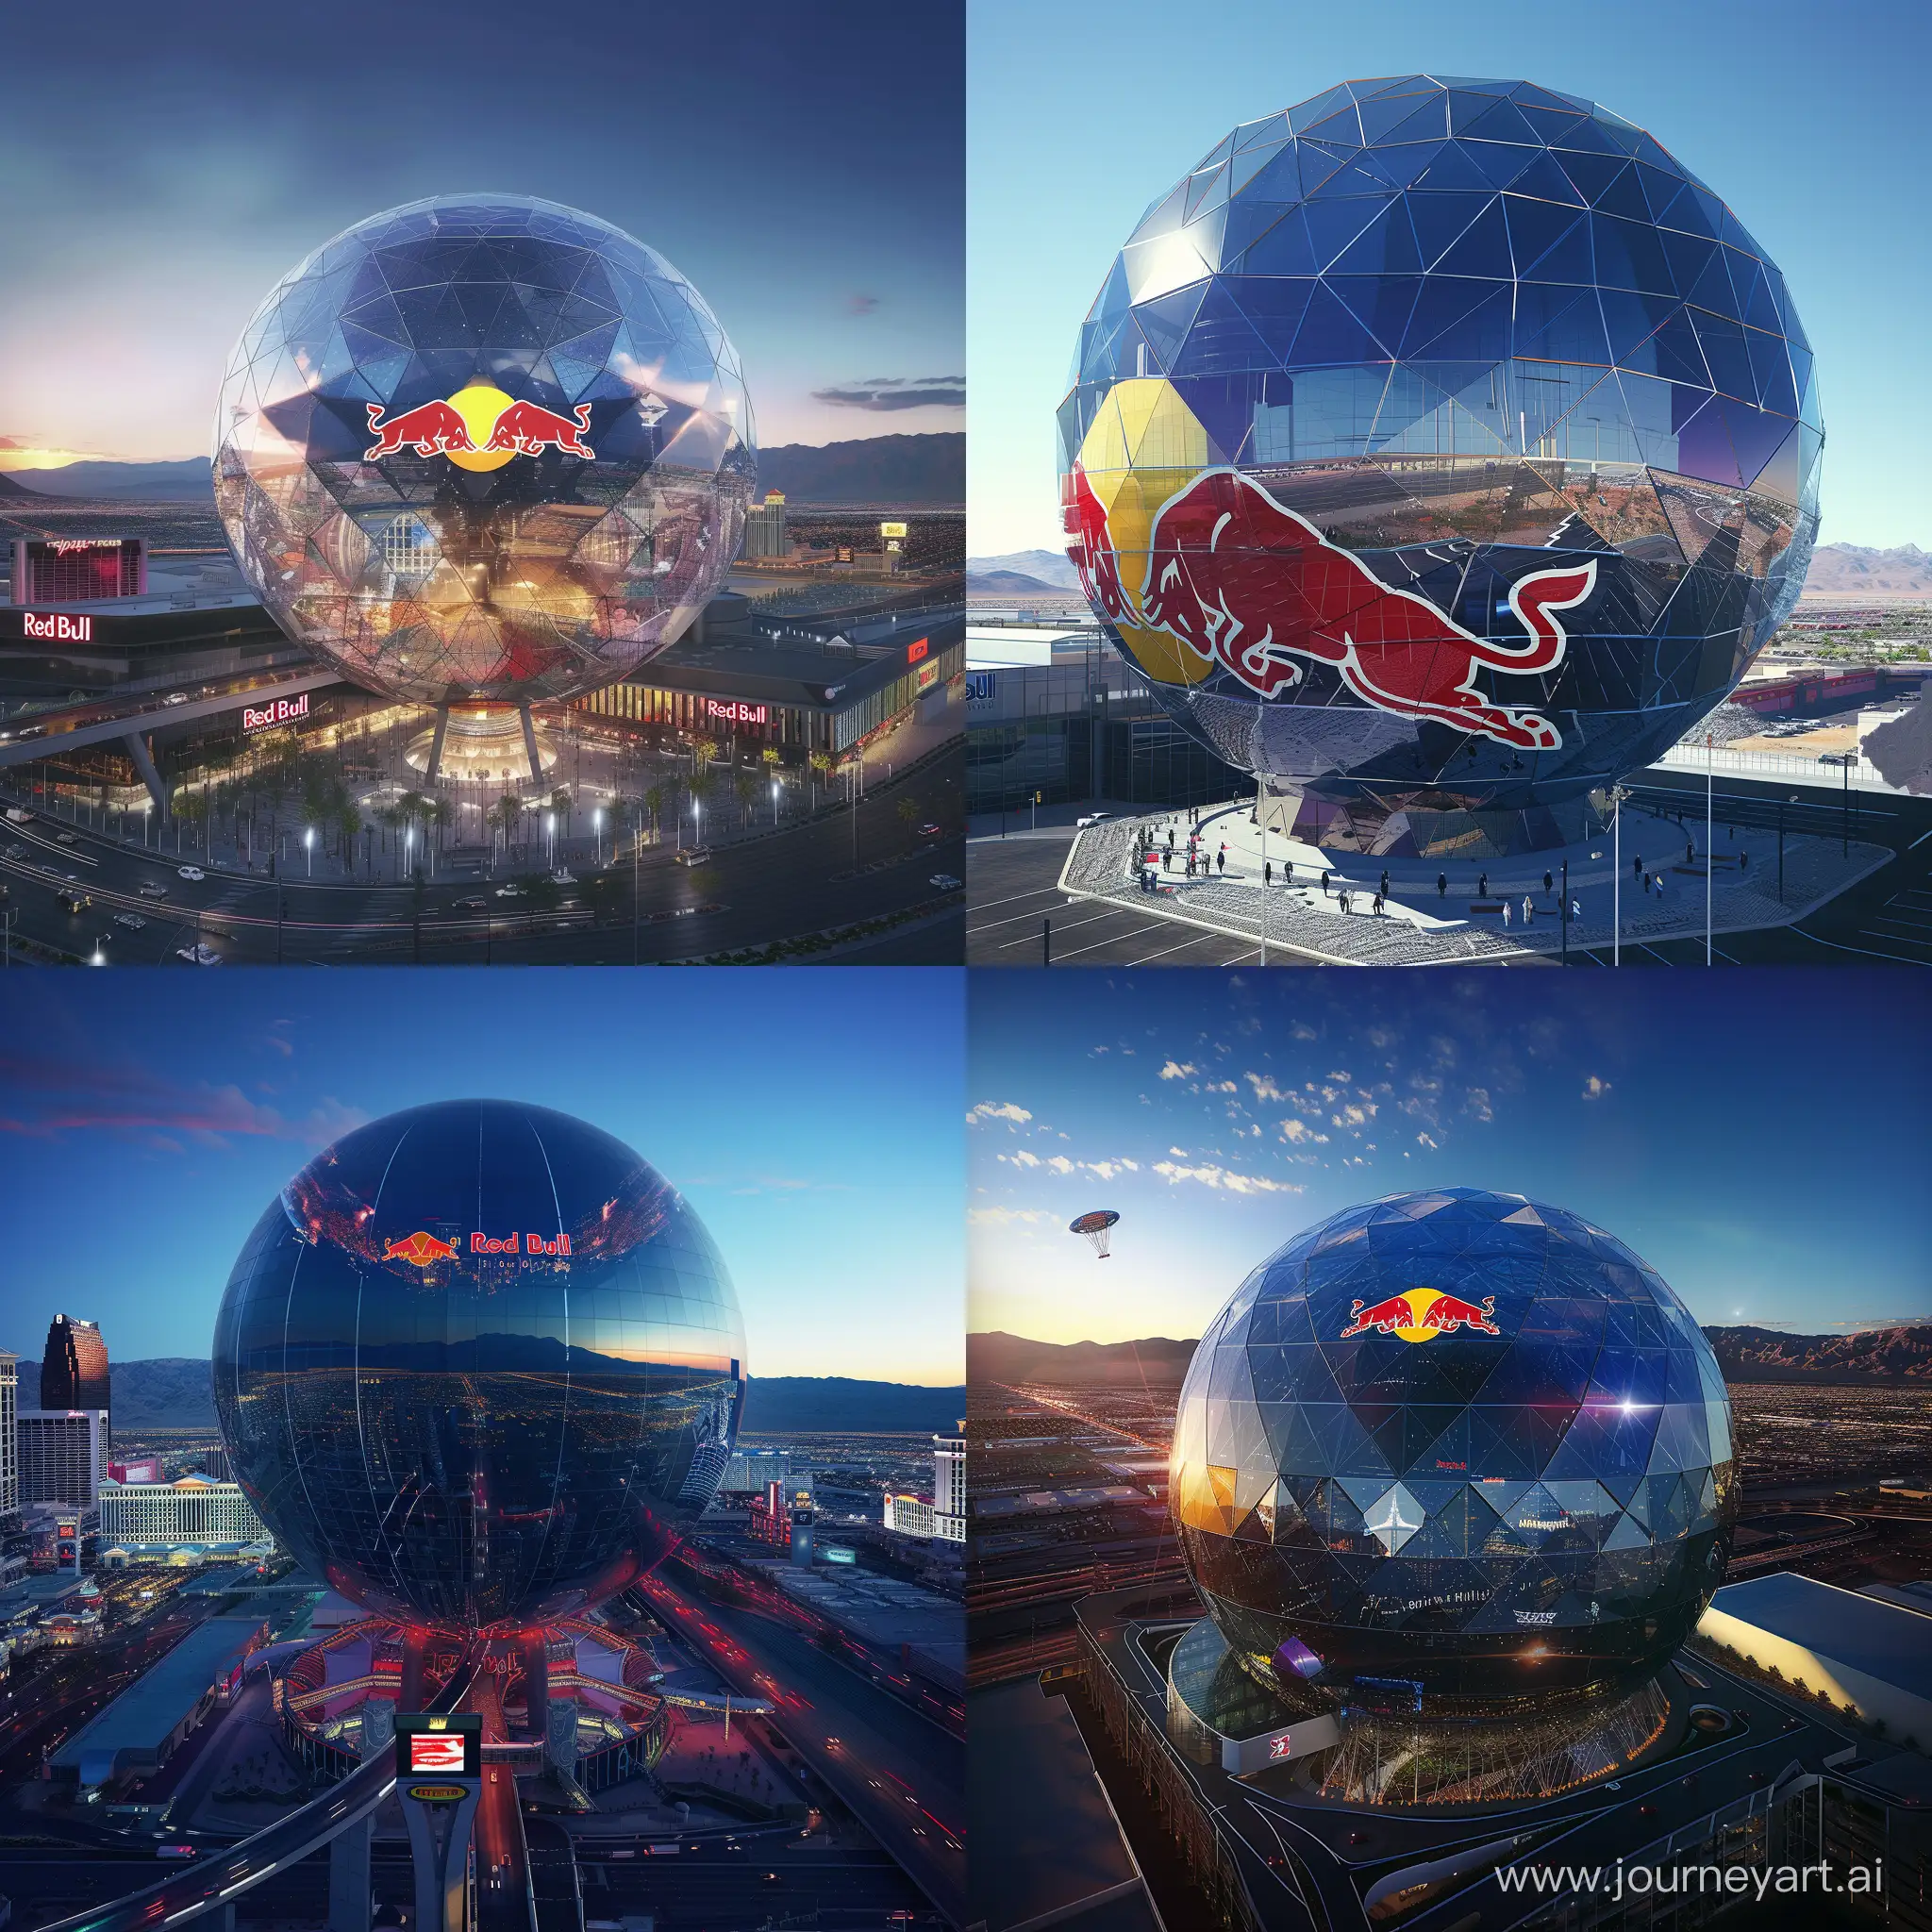 Imagine the Las Vegas Sphere, but owned by Red Bull. How it would look like?

